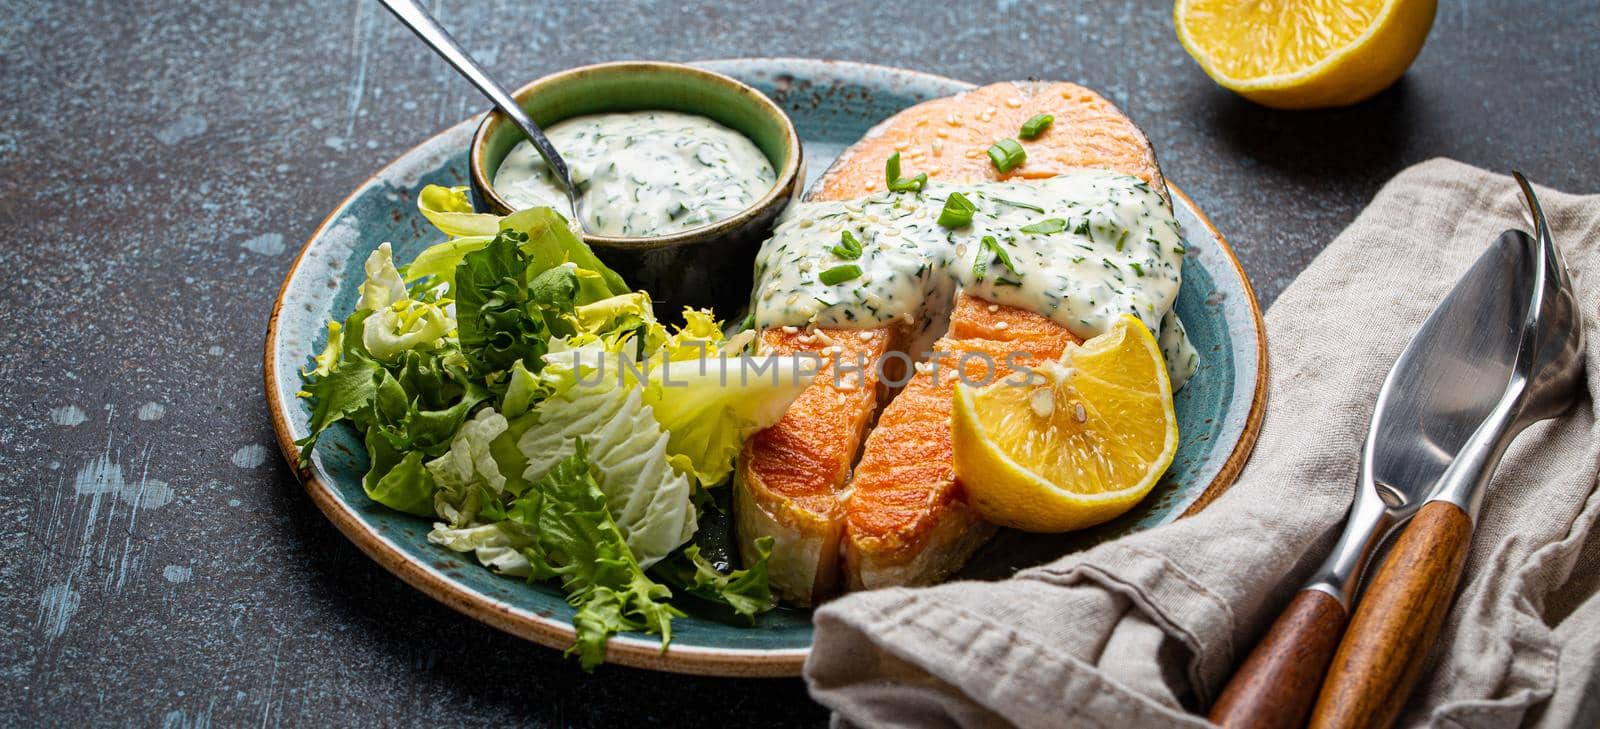 Healthy food meal cooked grilled salmon steak with white dill sauce and green salad leafs by its_al_dente